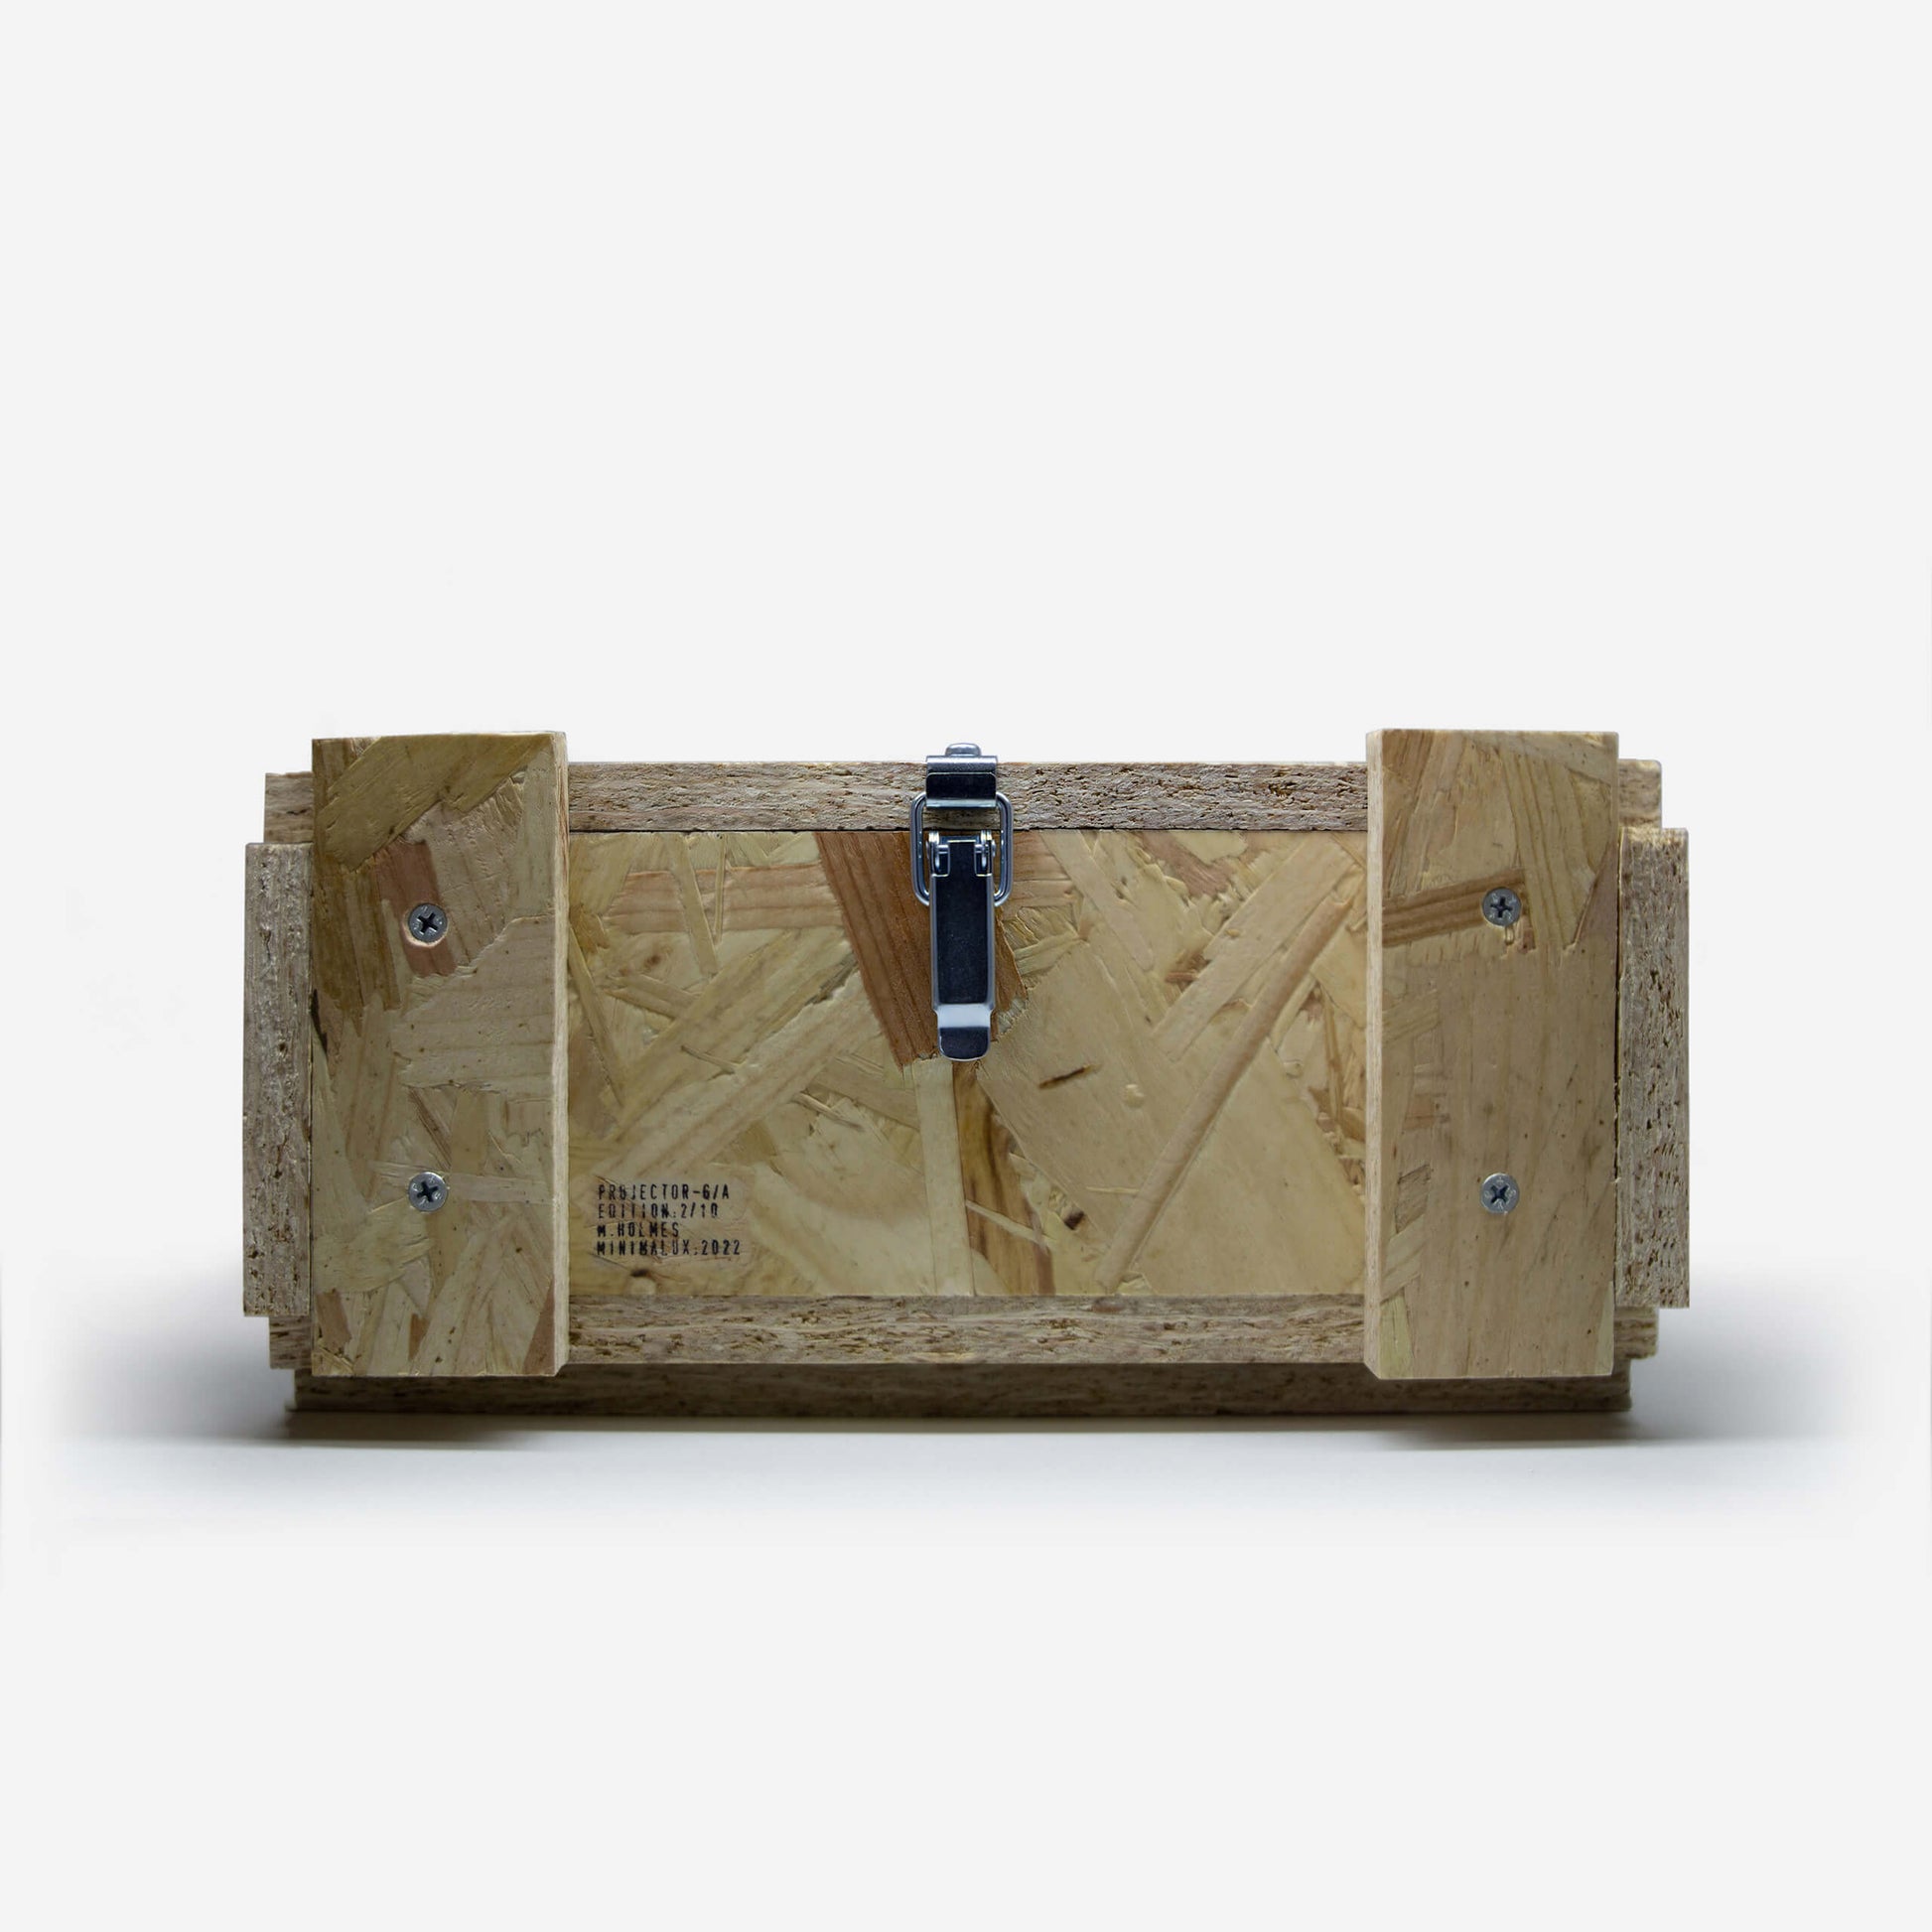 Crate for Projector - Minimalux